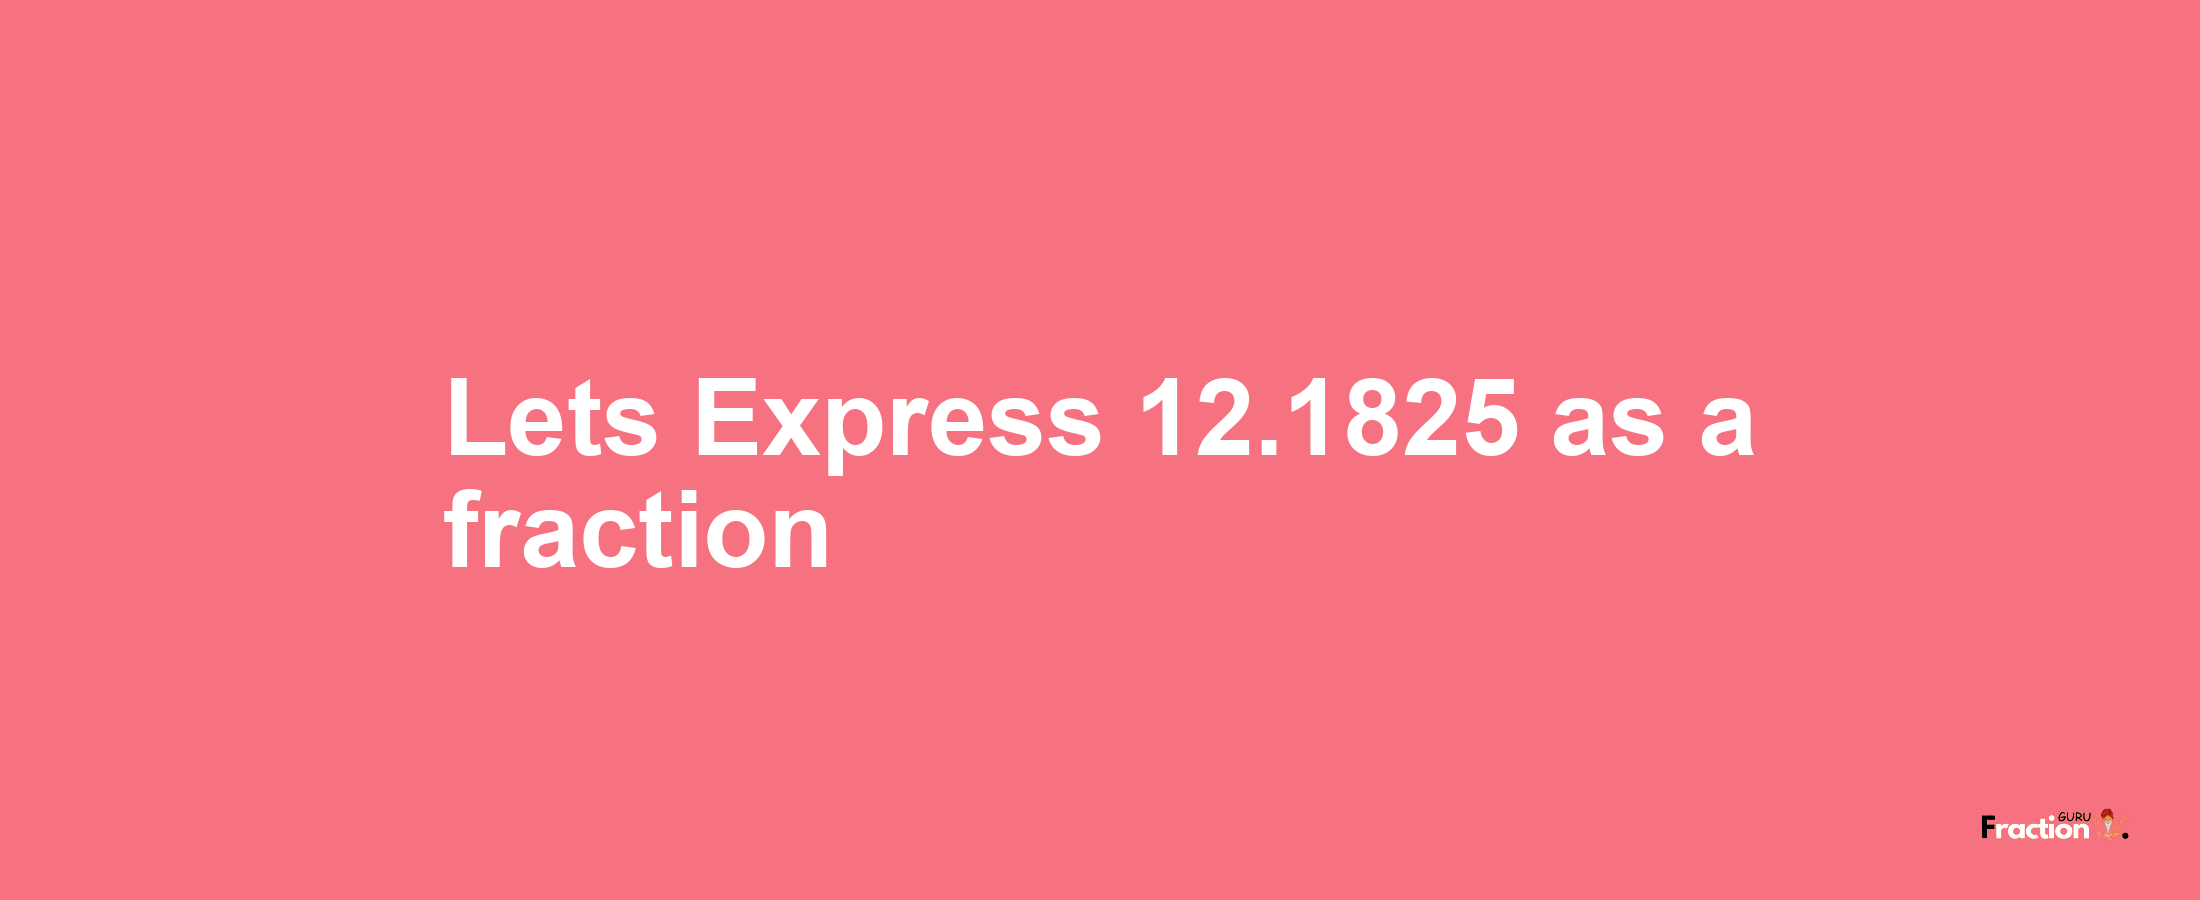 Lets Express 12.1825 as afraction